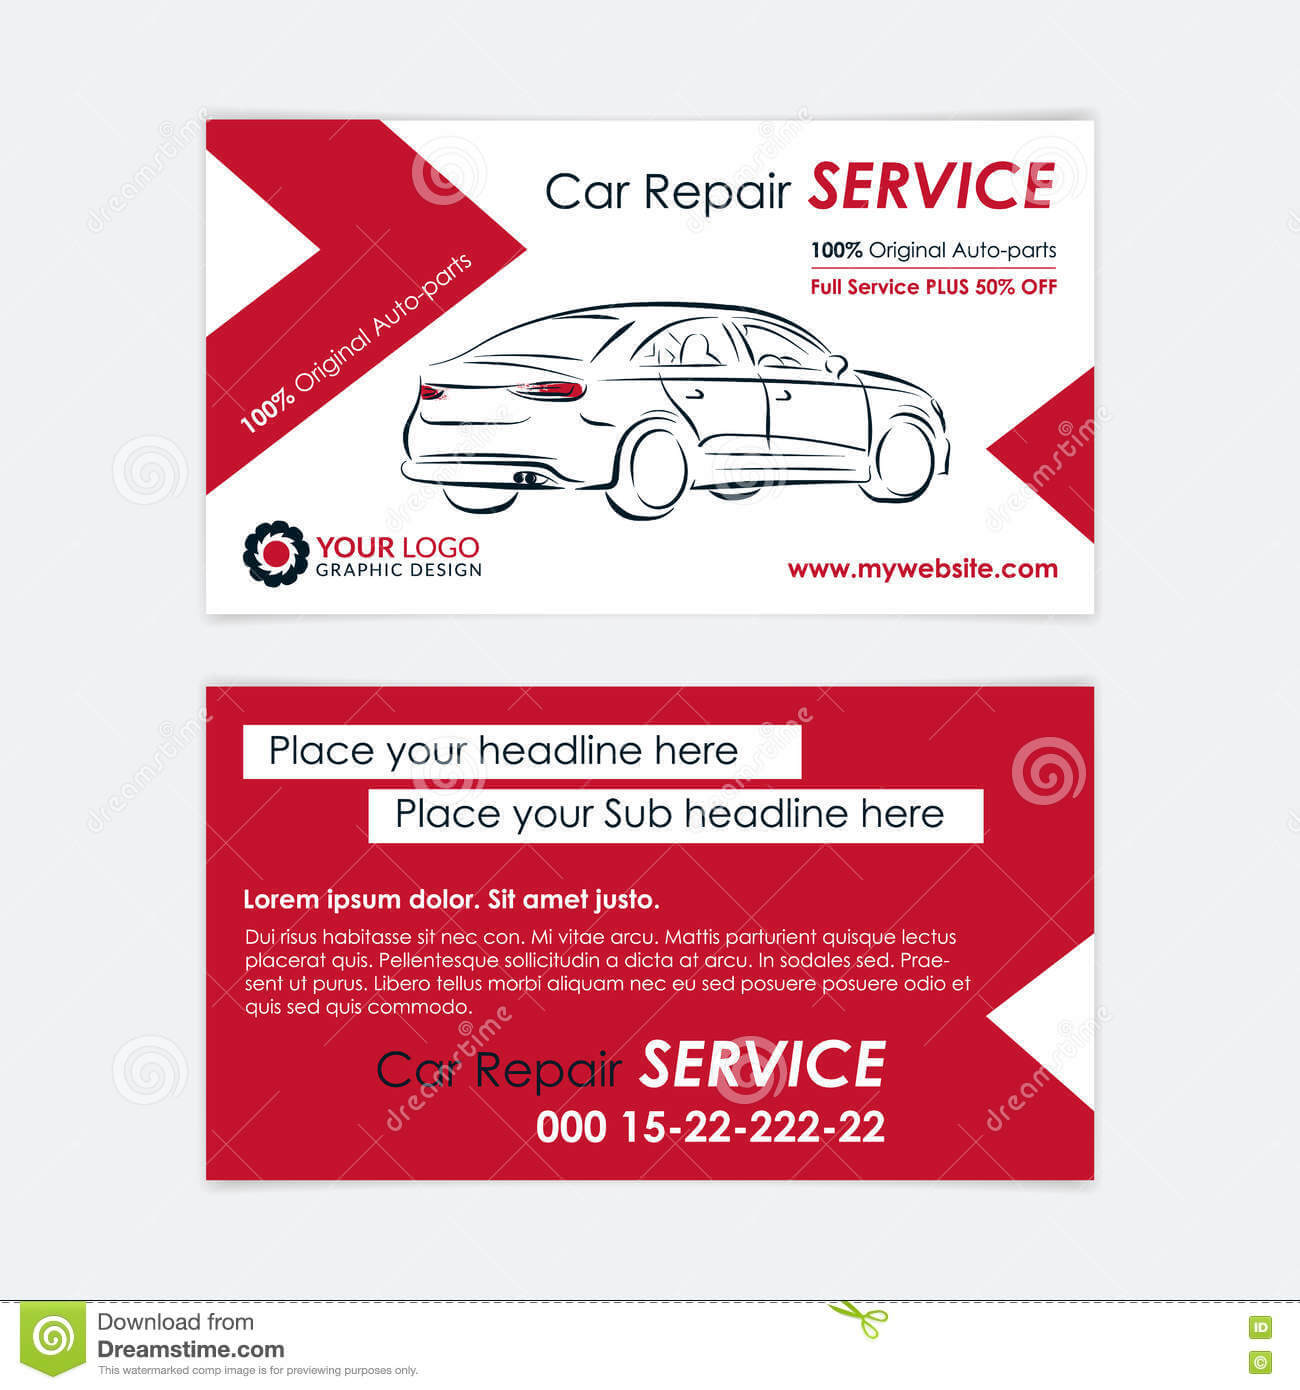 Auto Repair Business Card Template. Create Your Own Business Intended For Automotive Business Card Templates